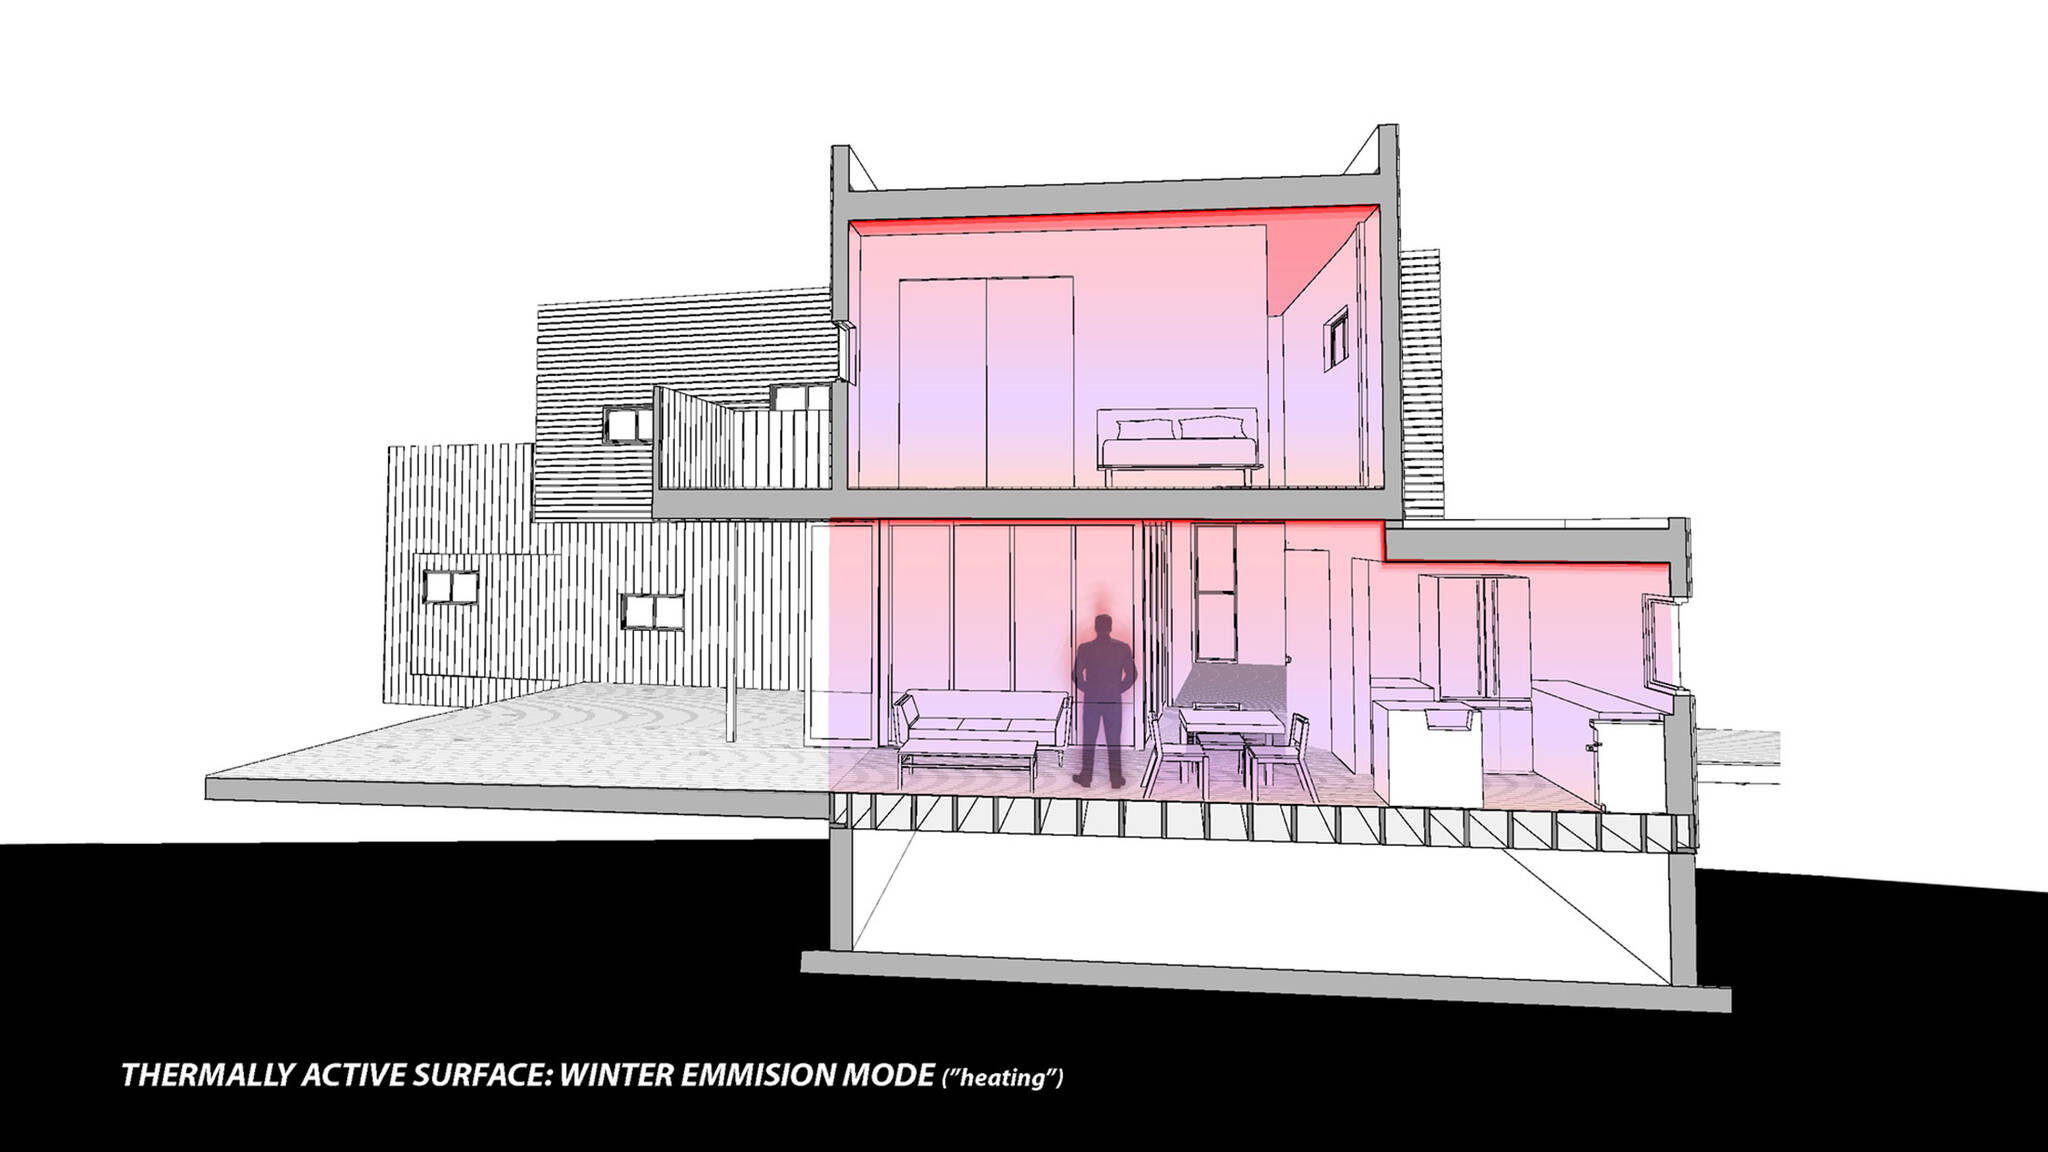 Diagram of the thermally active surface on a winter emission mode of the sustainable lake house project in Omena, Michigan designed by the architecture studio Danny Forster & Architecture